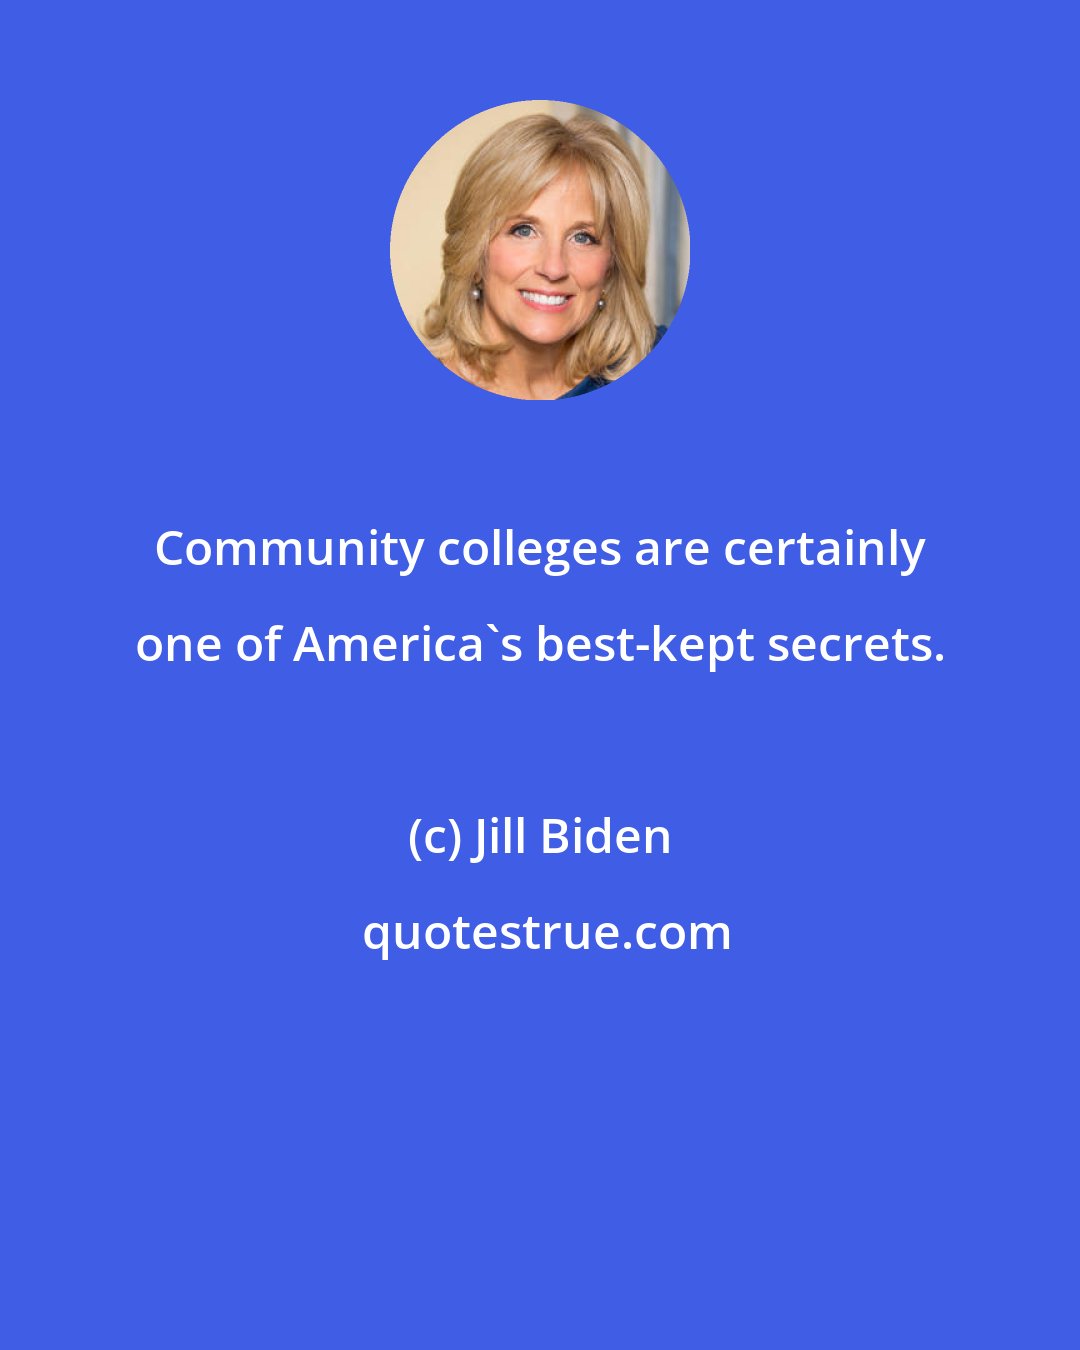 Jill Biden: Community colleges are certainly one of America's best-kept secrets.